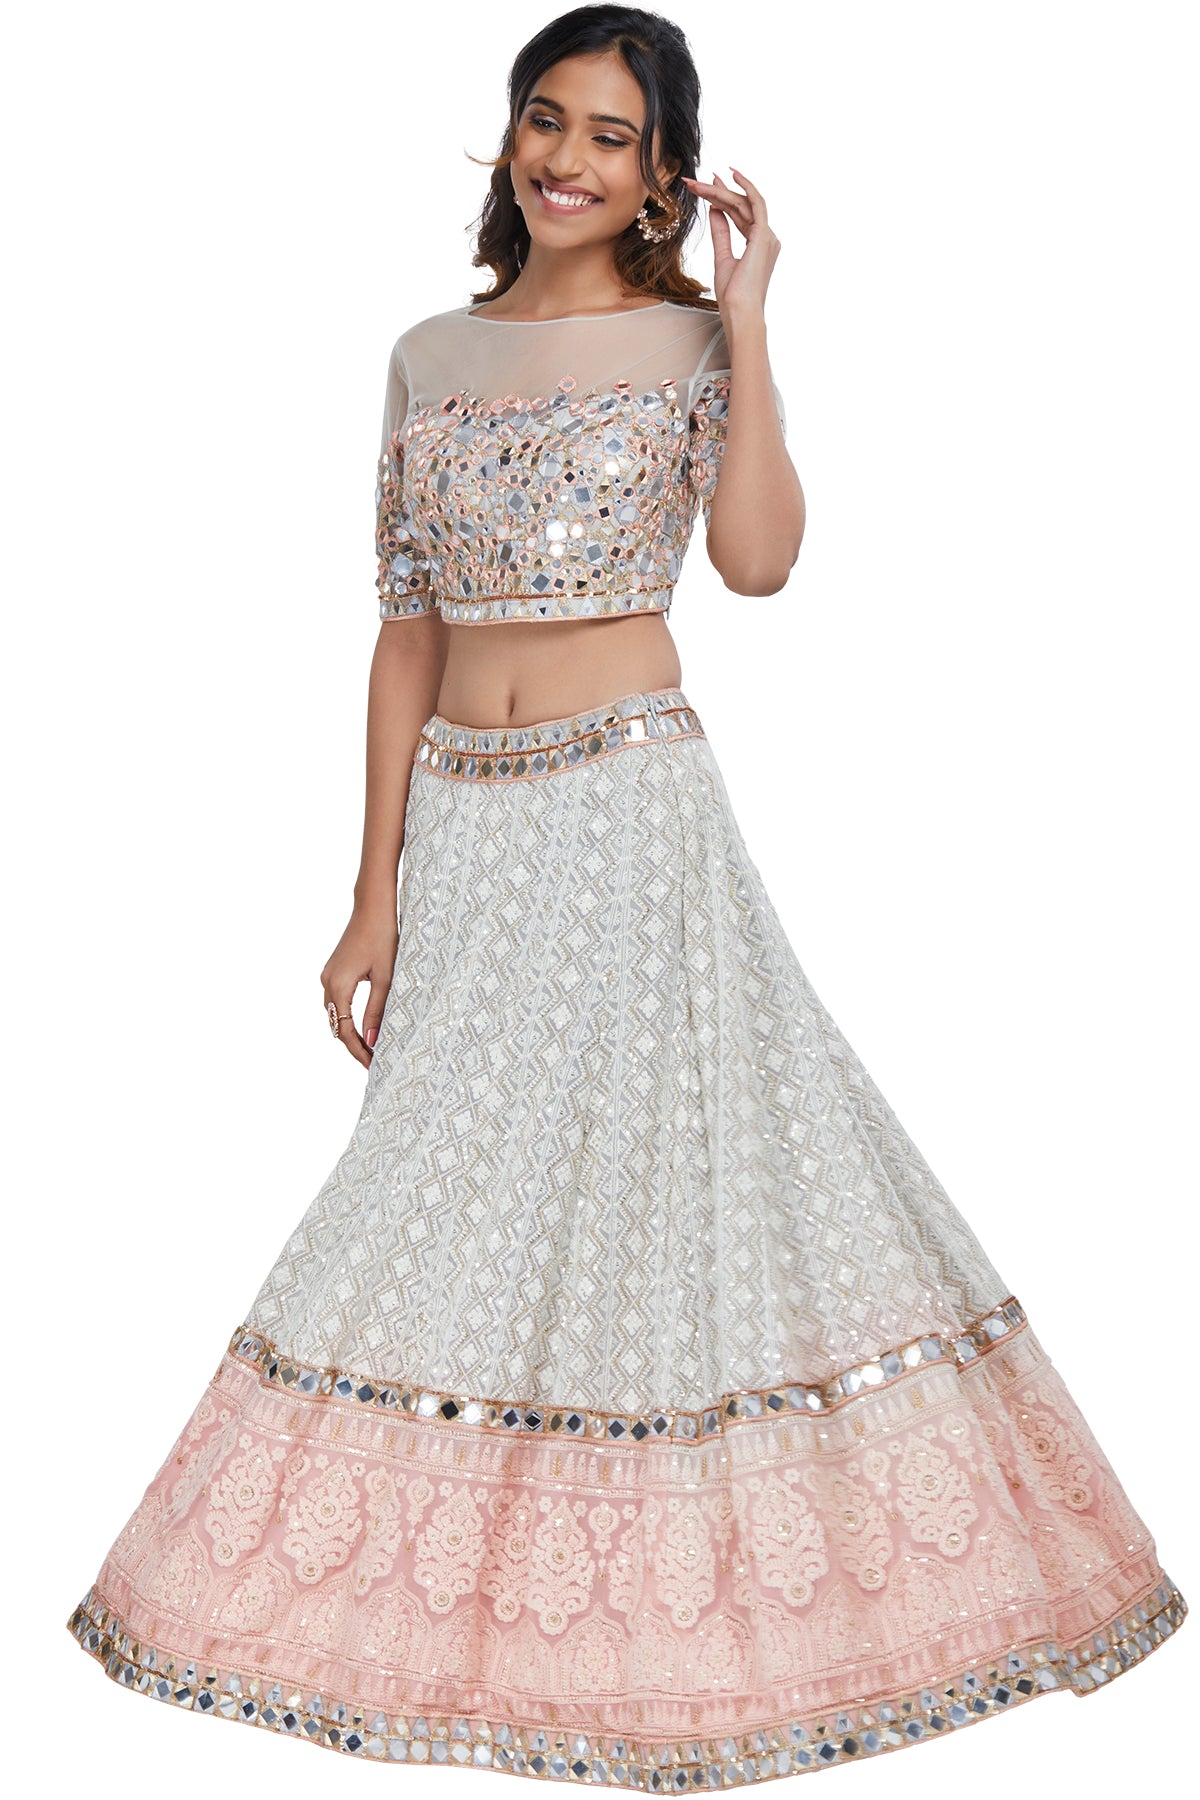 Mirror a mystical aura of glamour and make all the right vows toward high fashion in this mirror work blouse over a grey and pink shaded lucknowi lehenga set with a pink net dupatta.